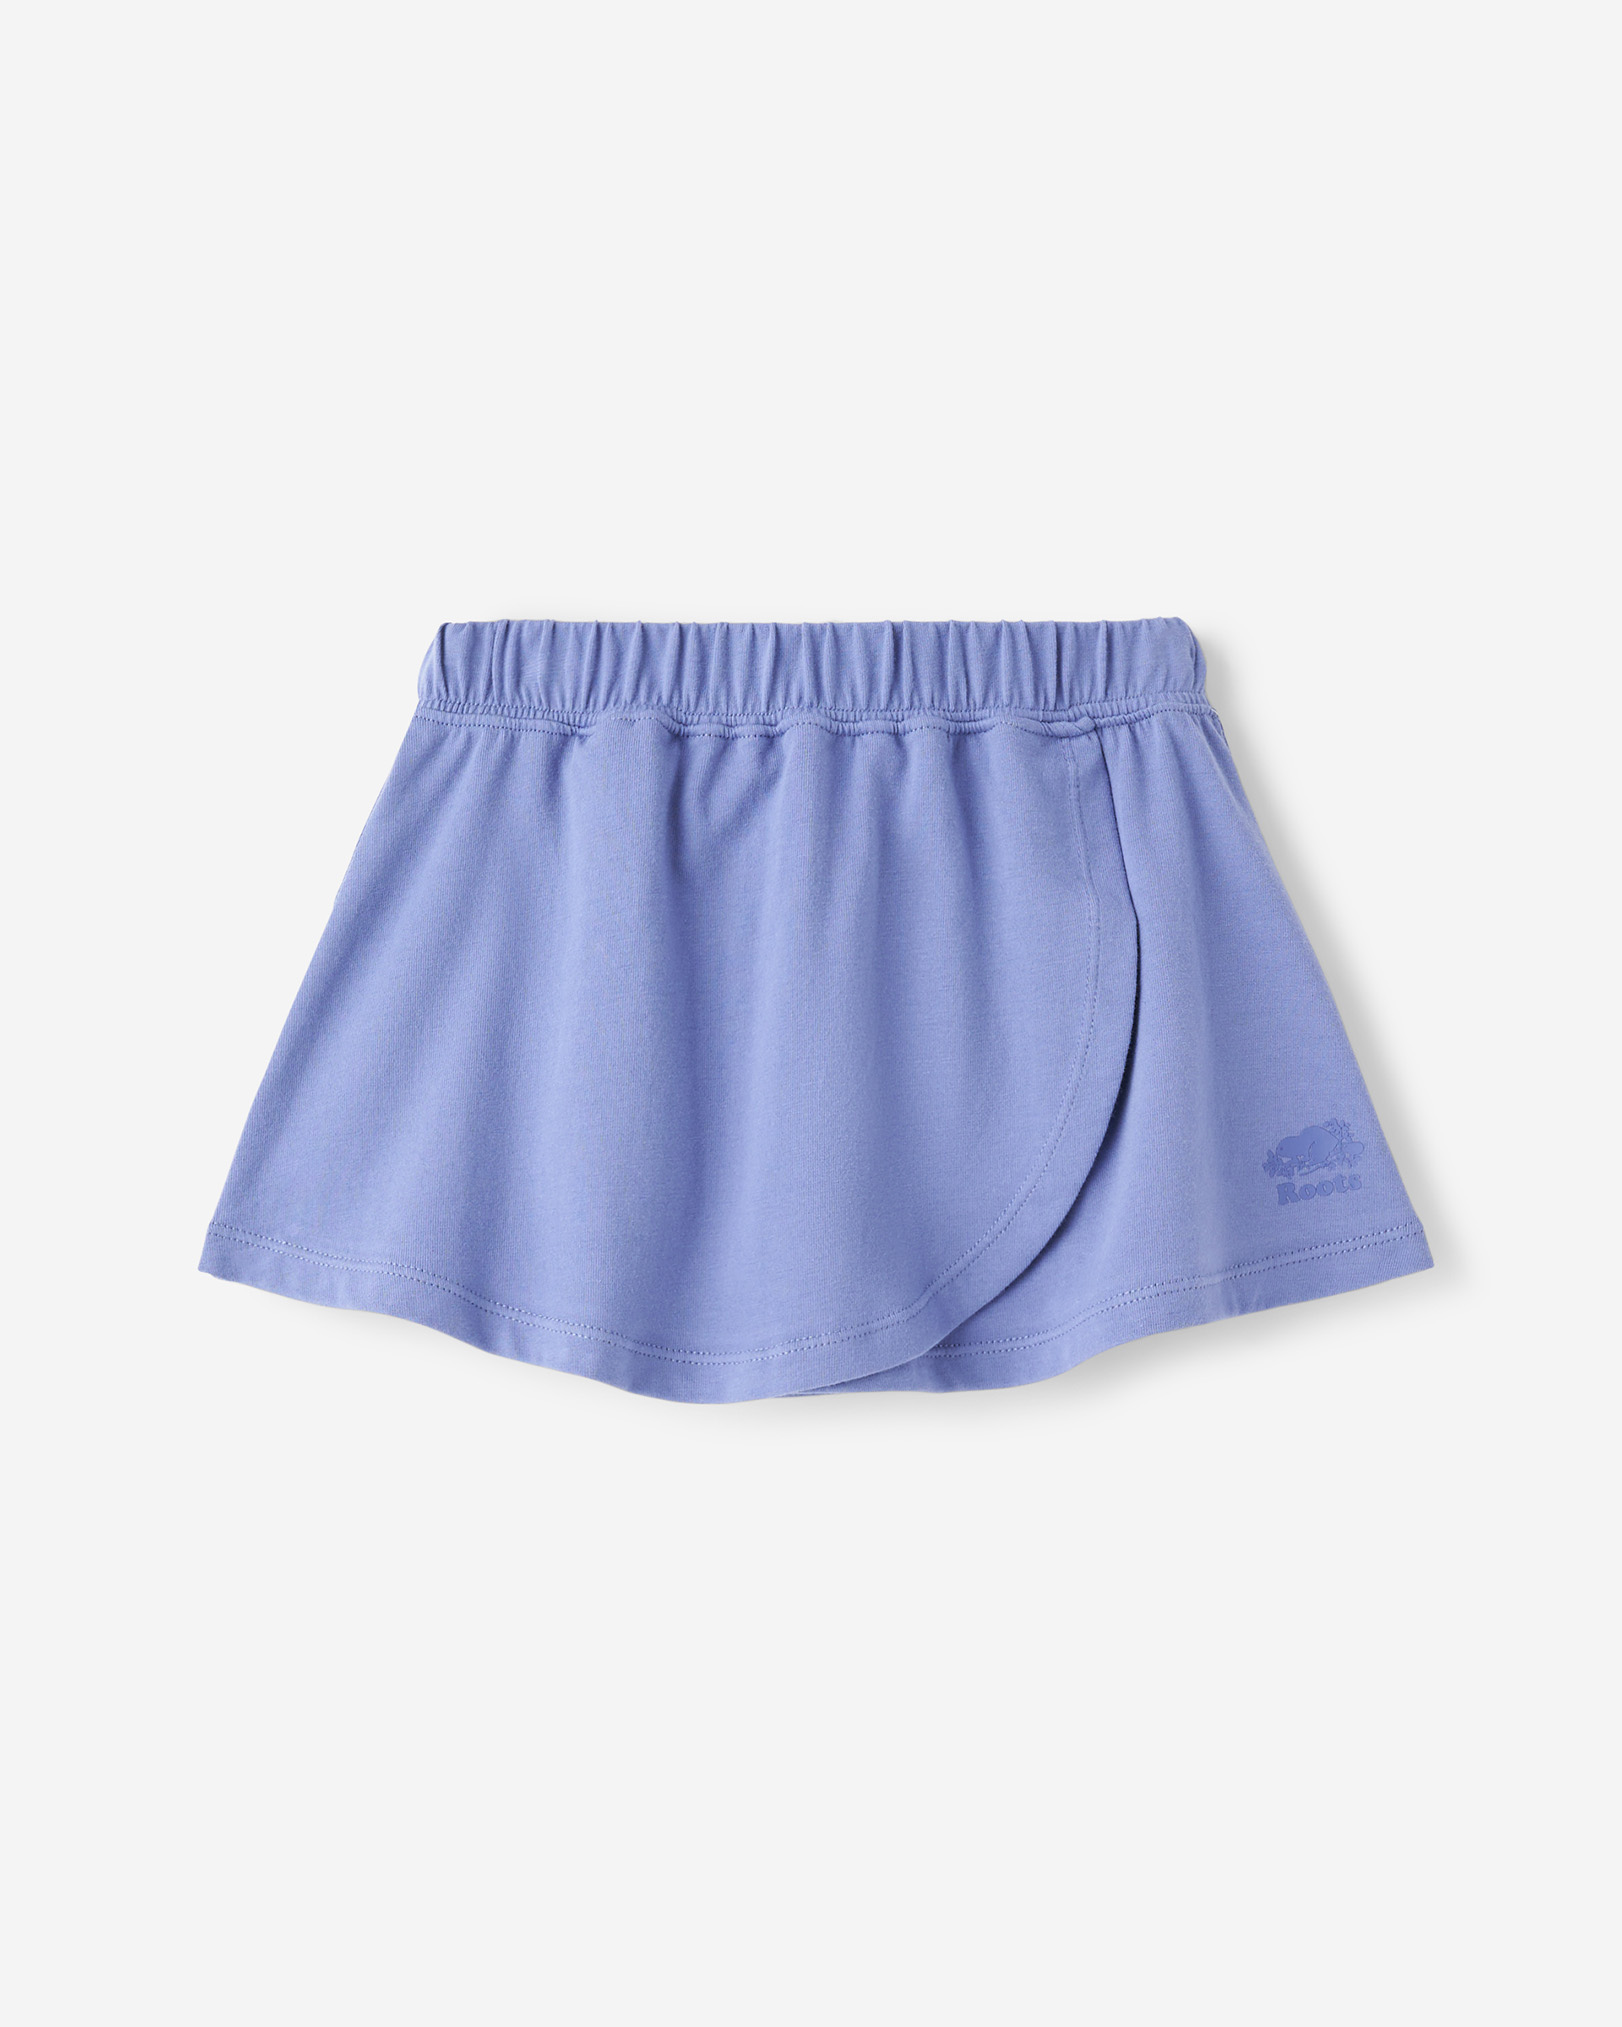 Roots Toddler Girl's Dance Skirt in Periwinkle Purple